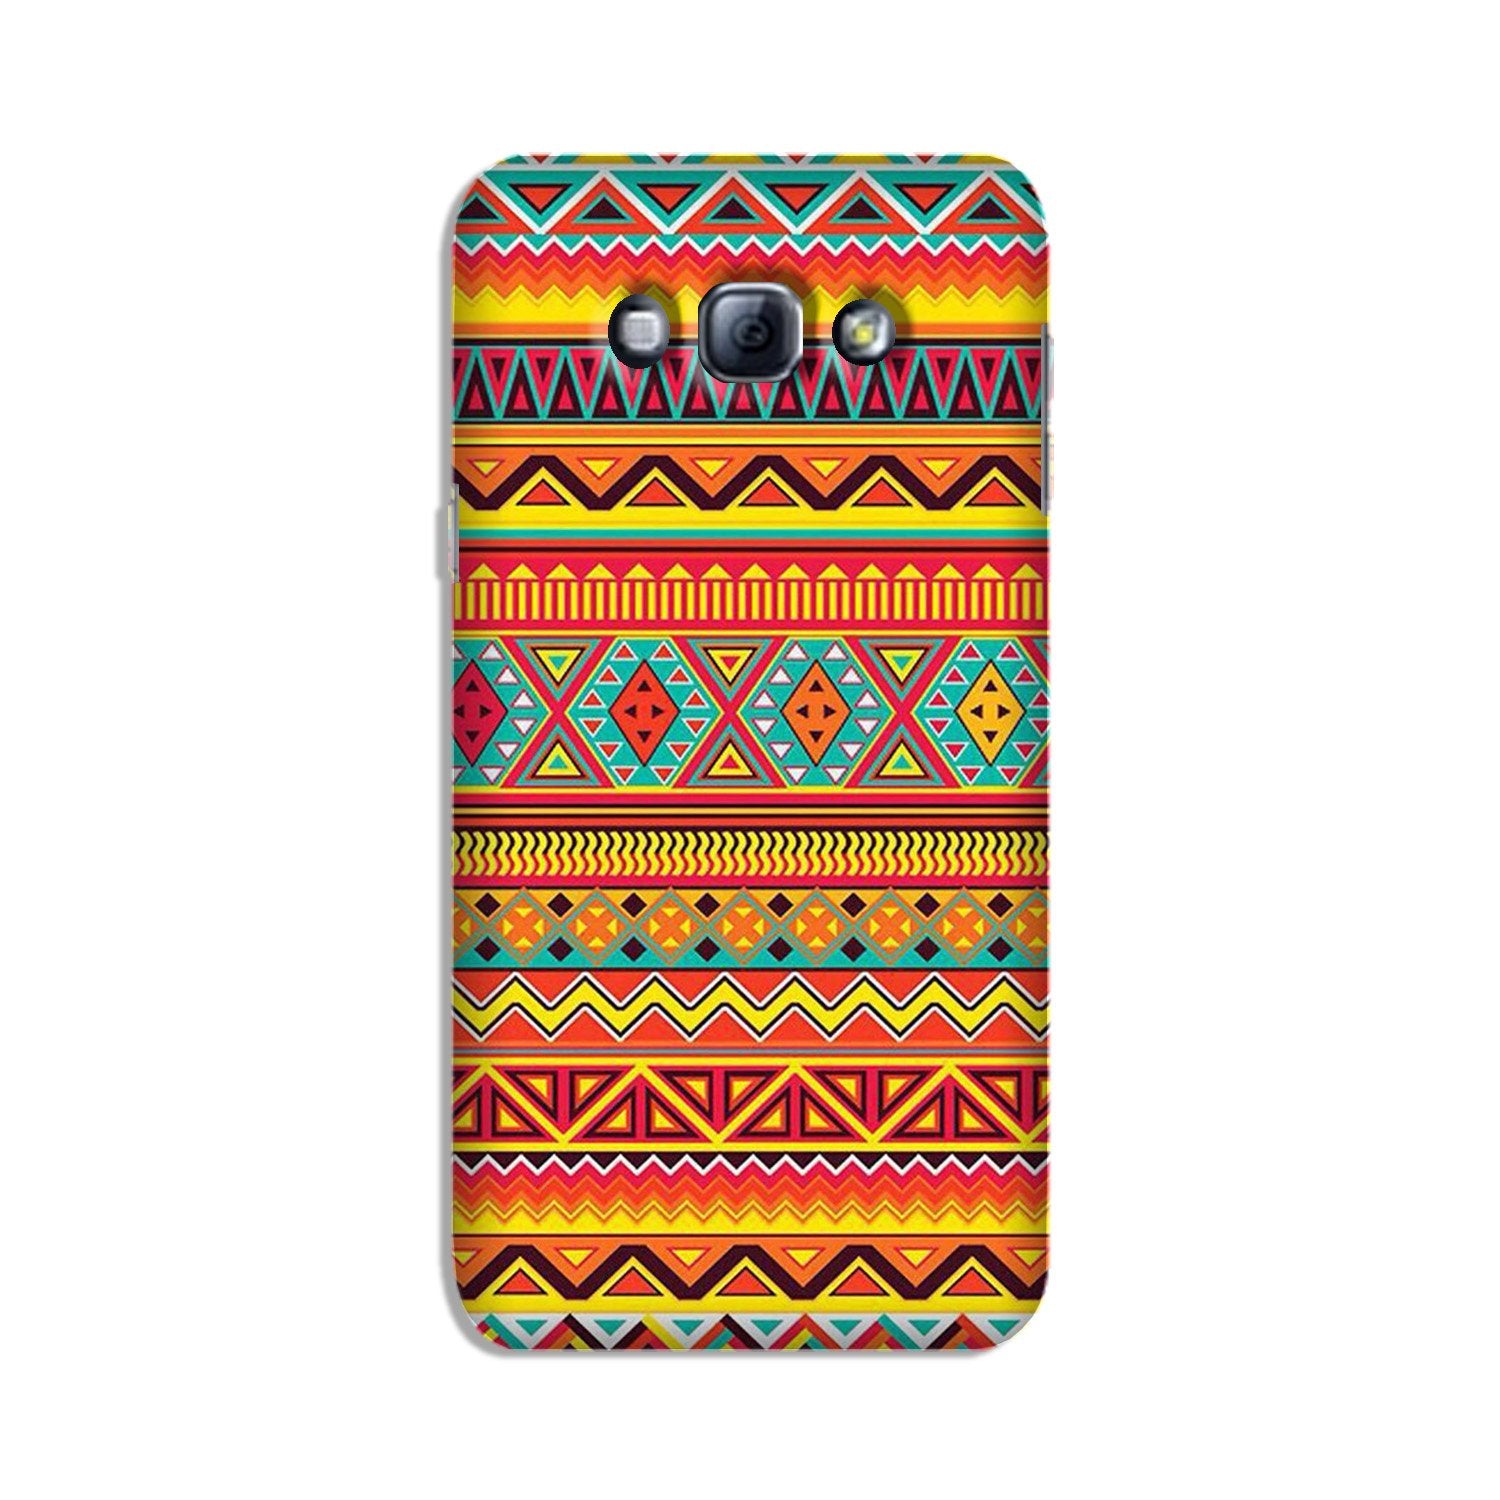 Zigzag line pattern Case for Galaxy A8 (2015)